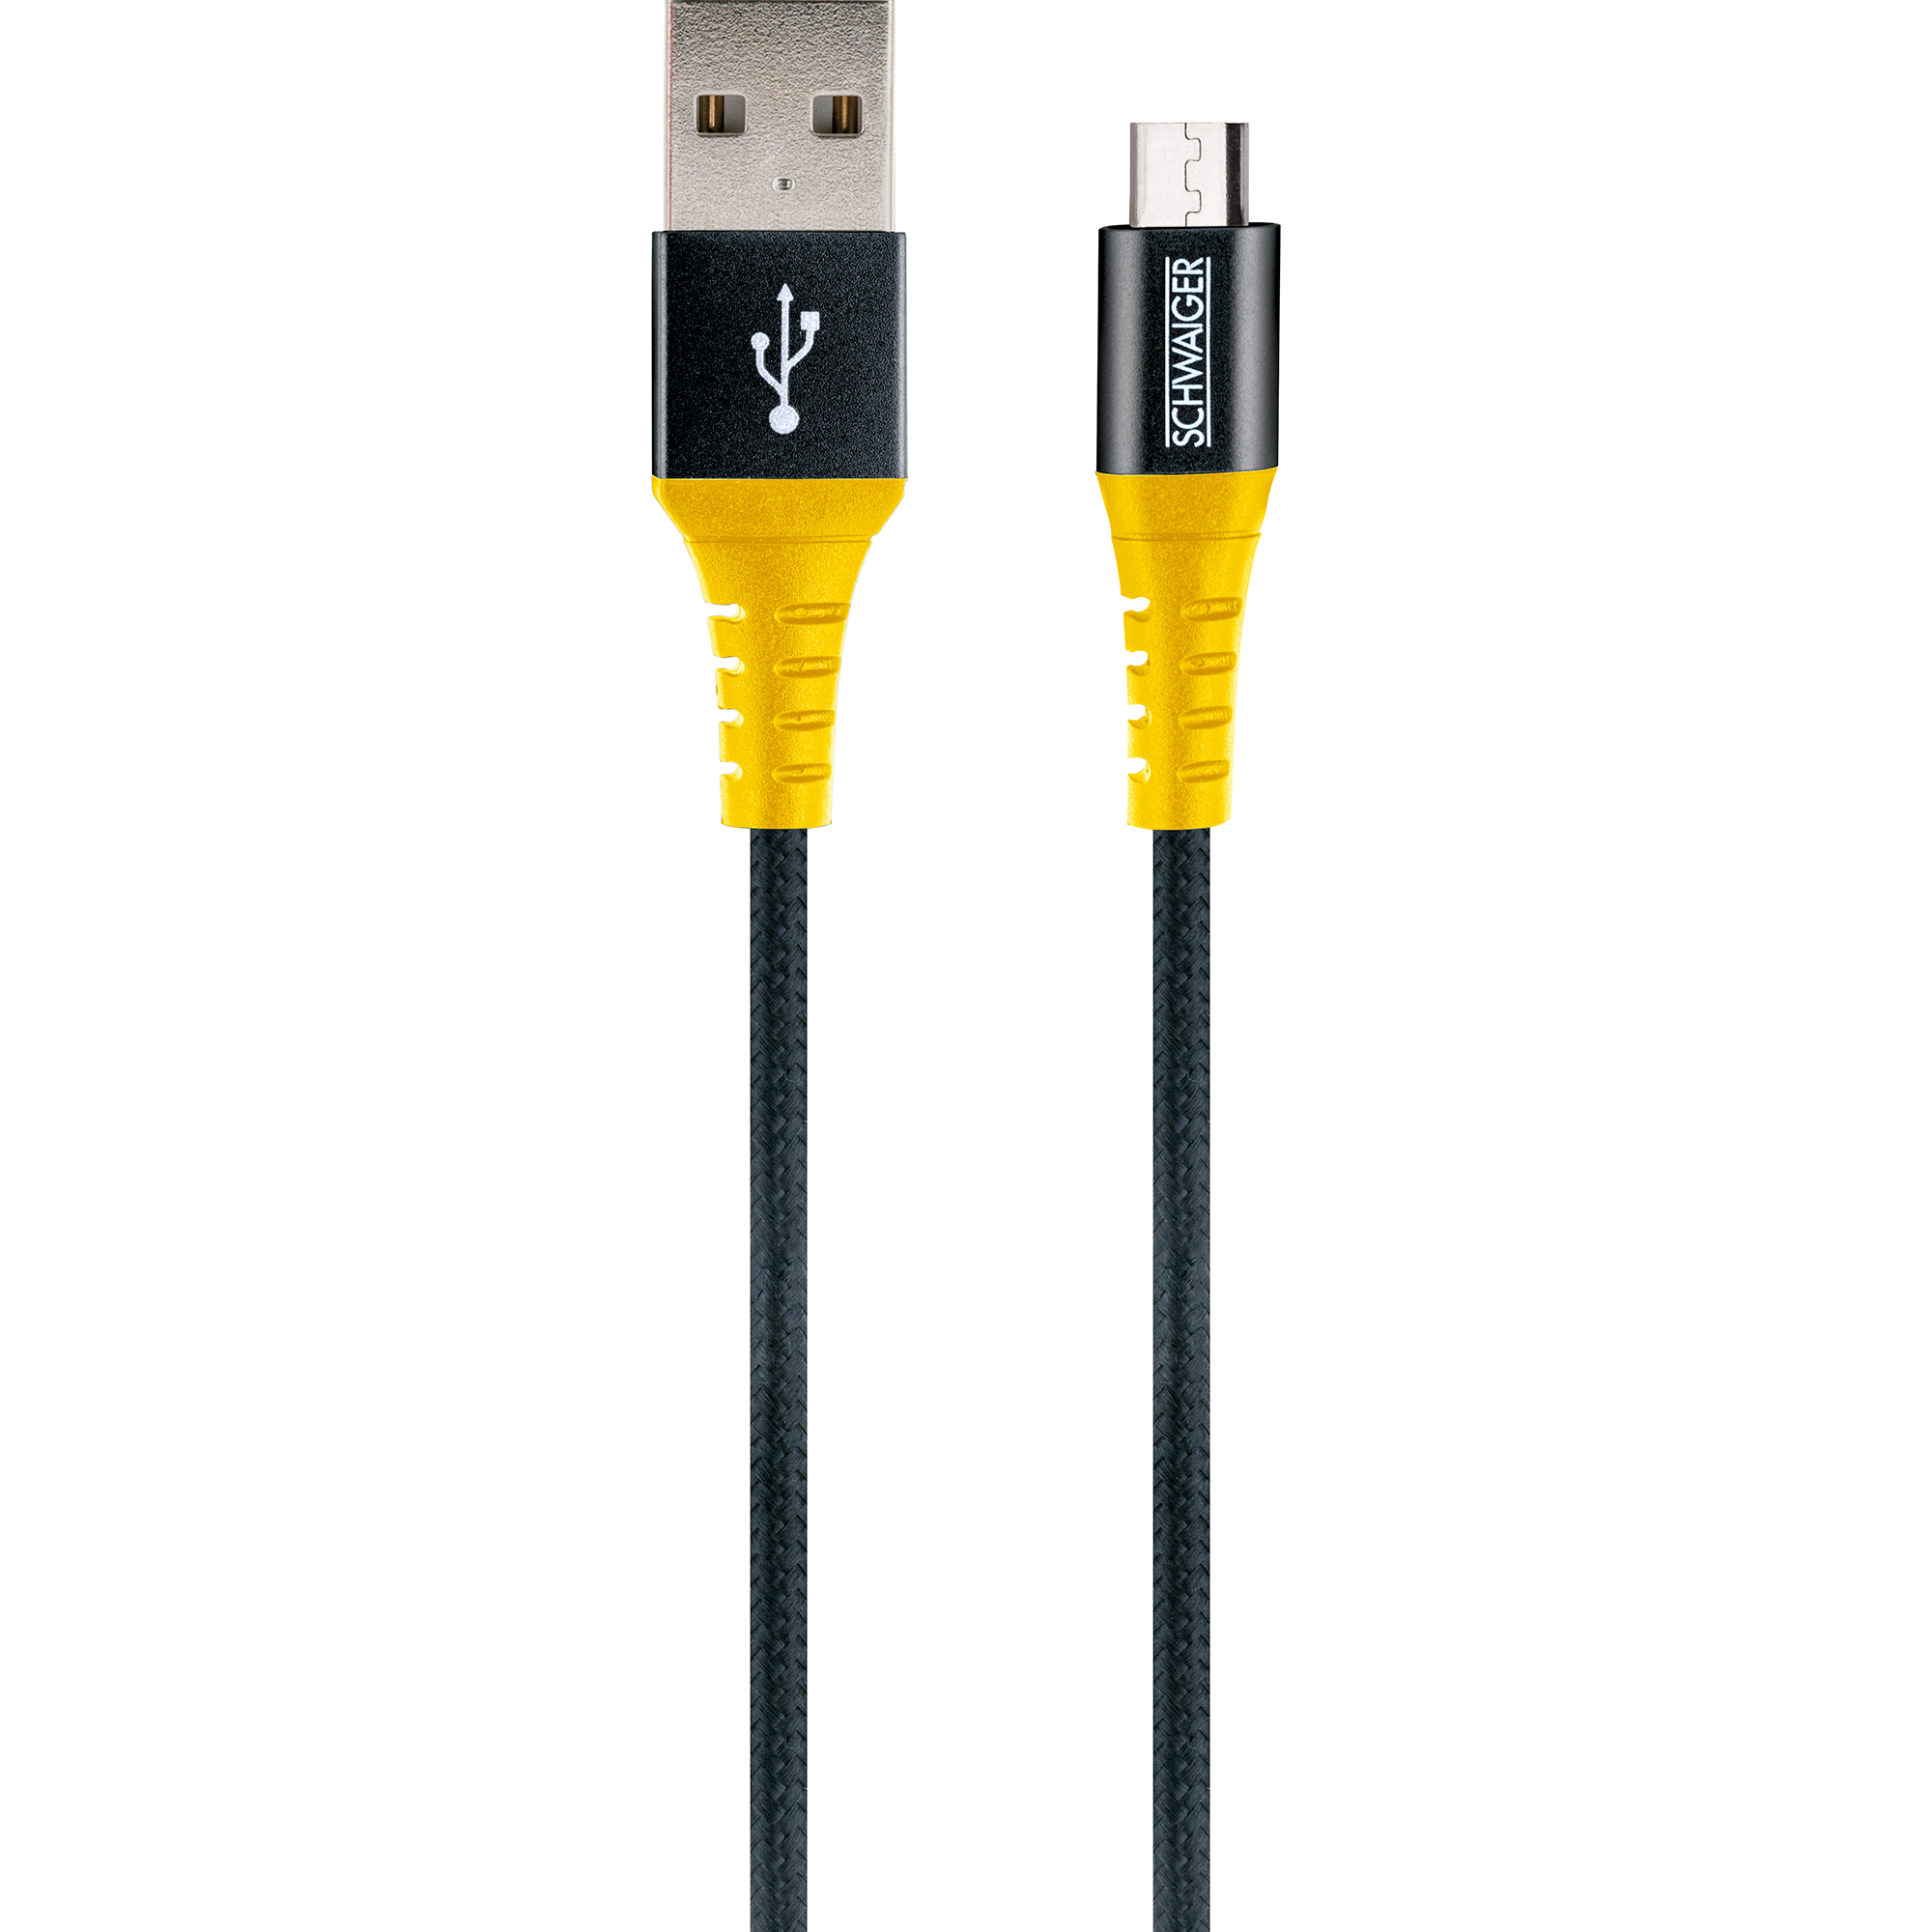 Micro USB Sync & Ladekabel 'Extreme' WKUM10 511 + product picture